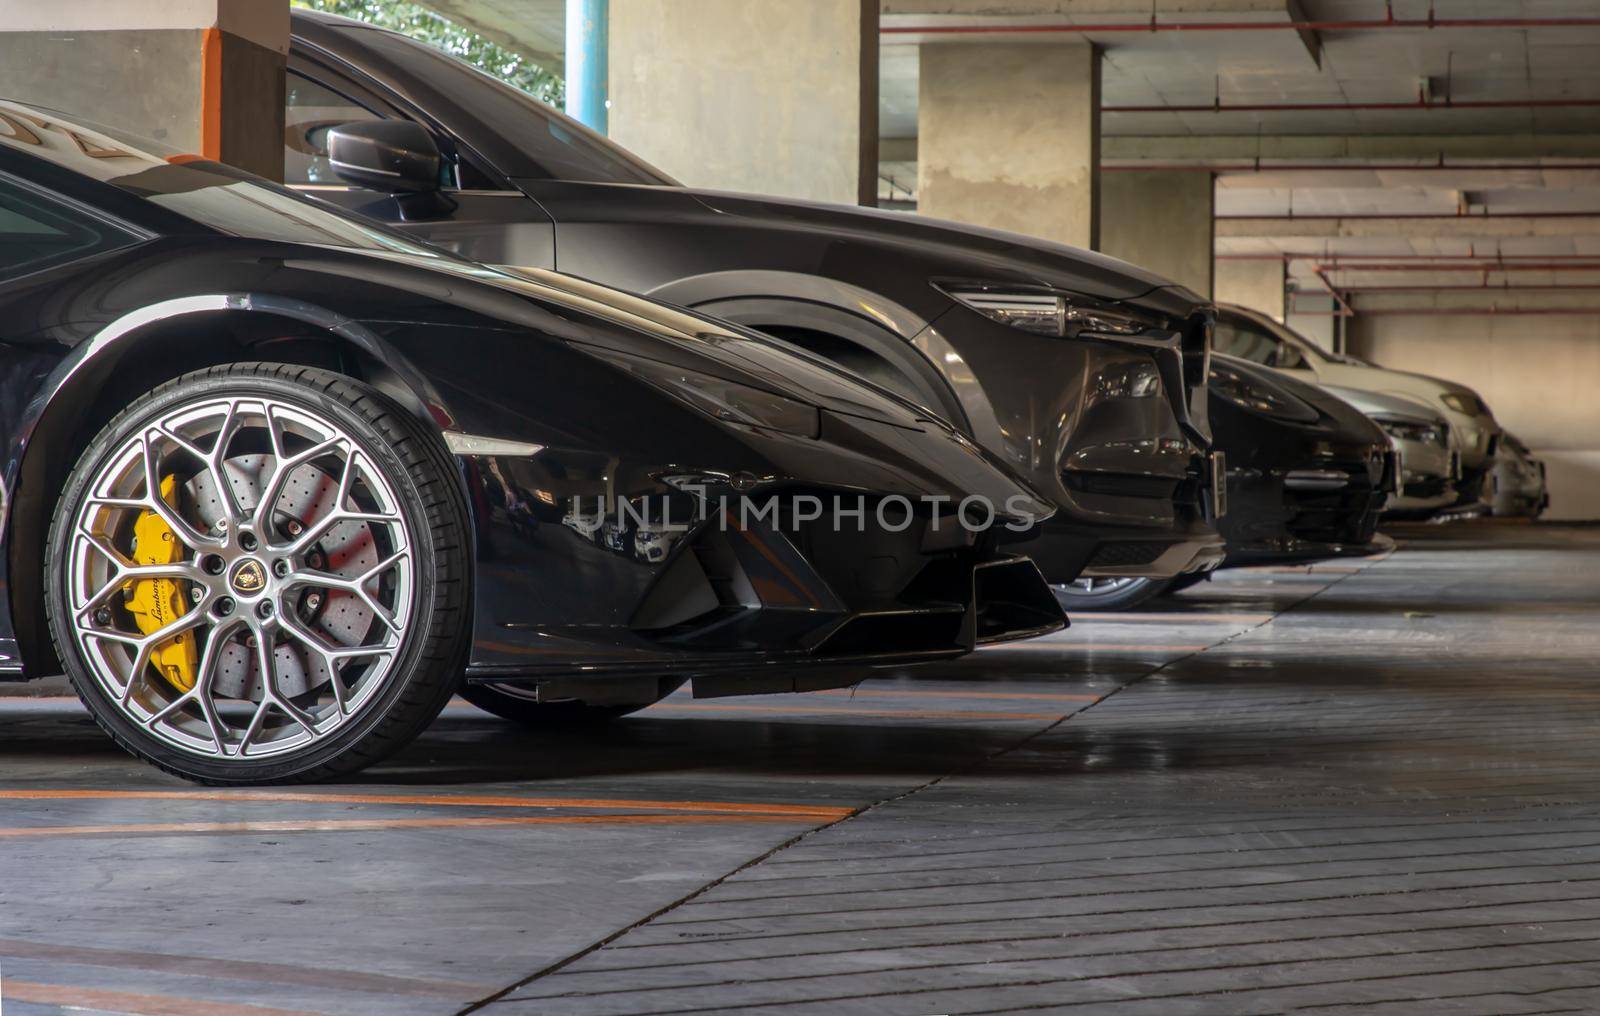 The side of Wheel of Black Lamborghini Sports Car parked in the parking lot. by tosirikul